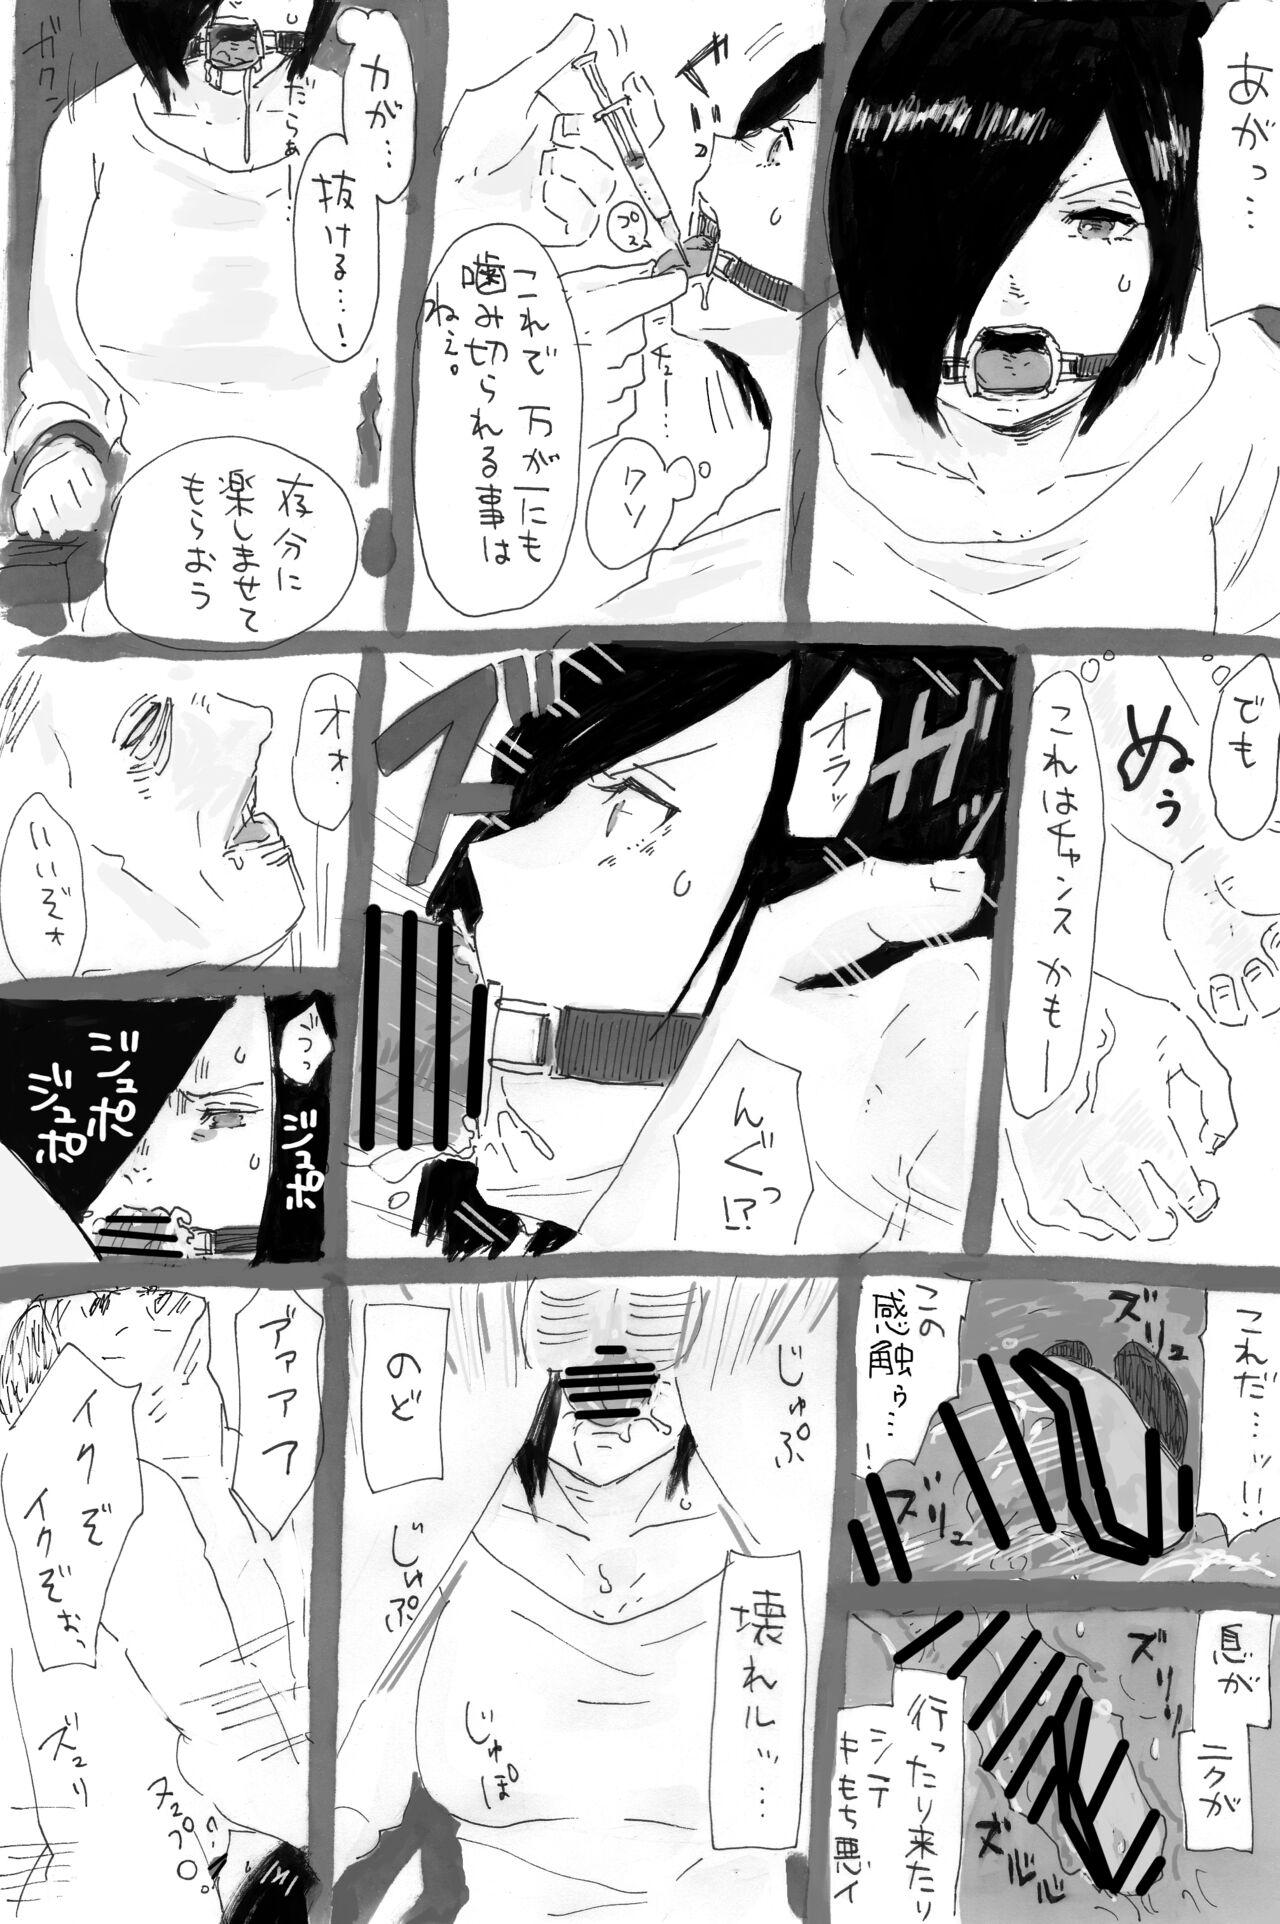 Spying トーカちゃん囚われIF - Tokyo ghoul Short - Page 10